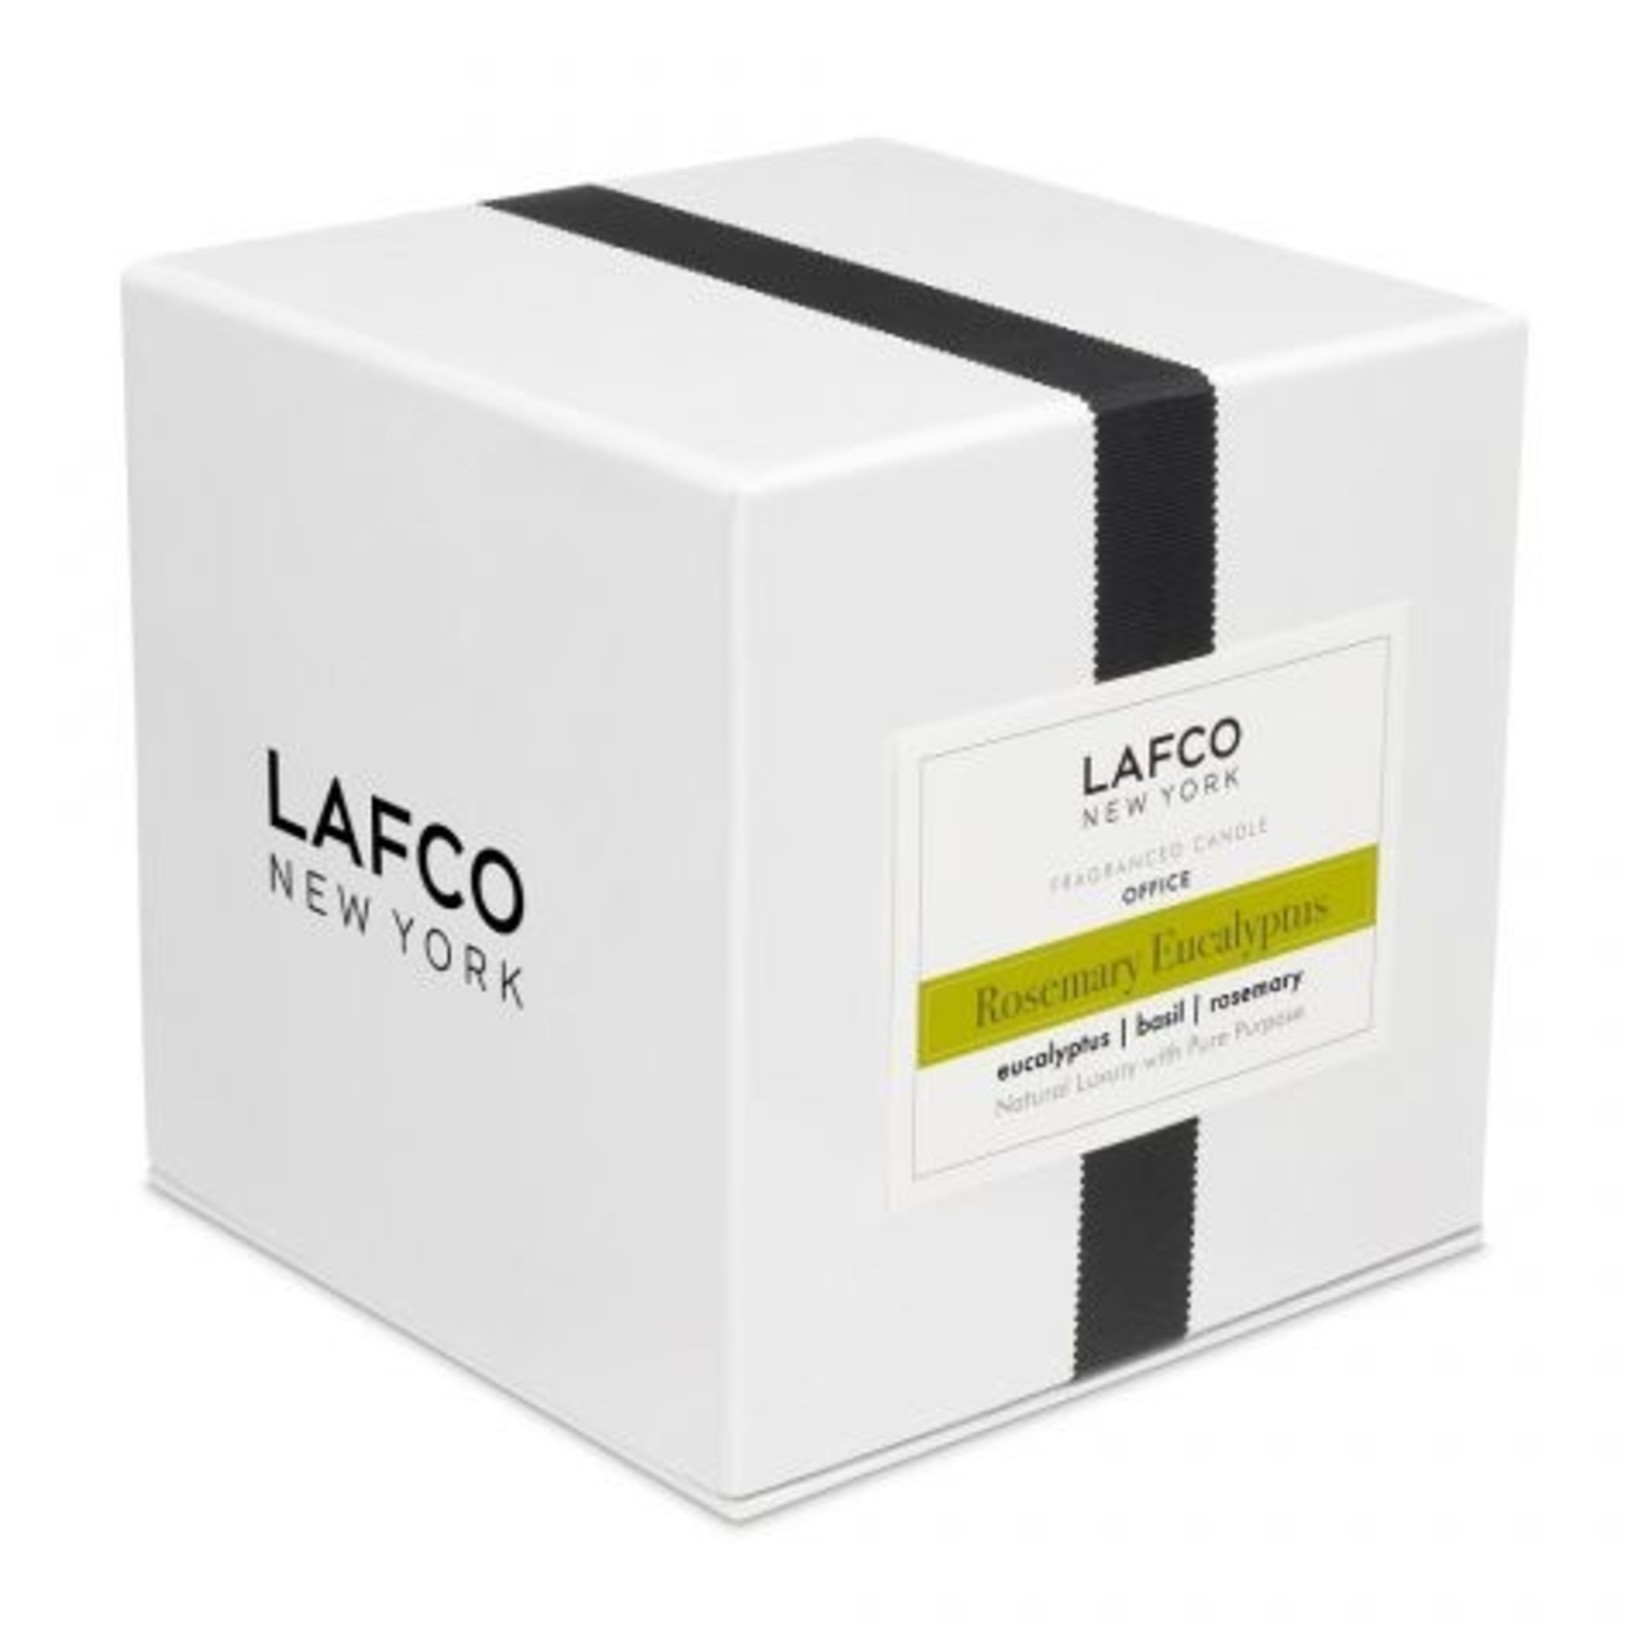 LAFCO Office - Classic Candle Rosemary Eucalyptus (6.5)